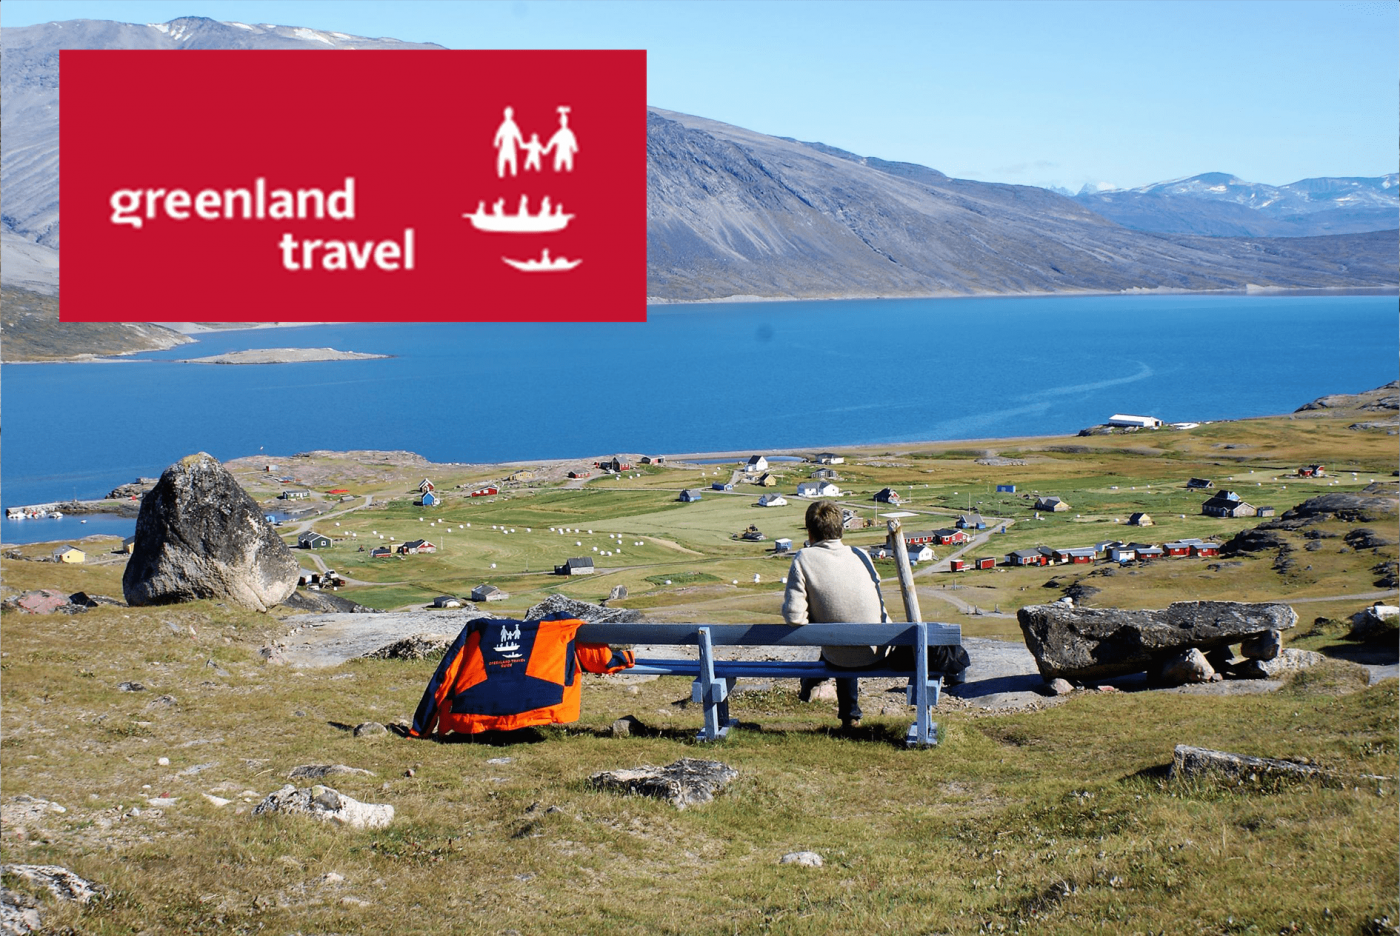 Greenland Travel: All in one: The grand tour of Greenland